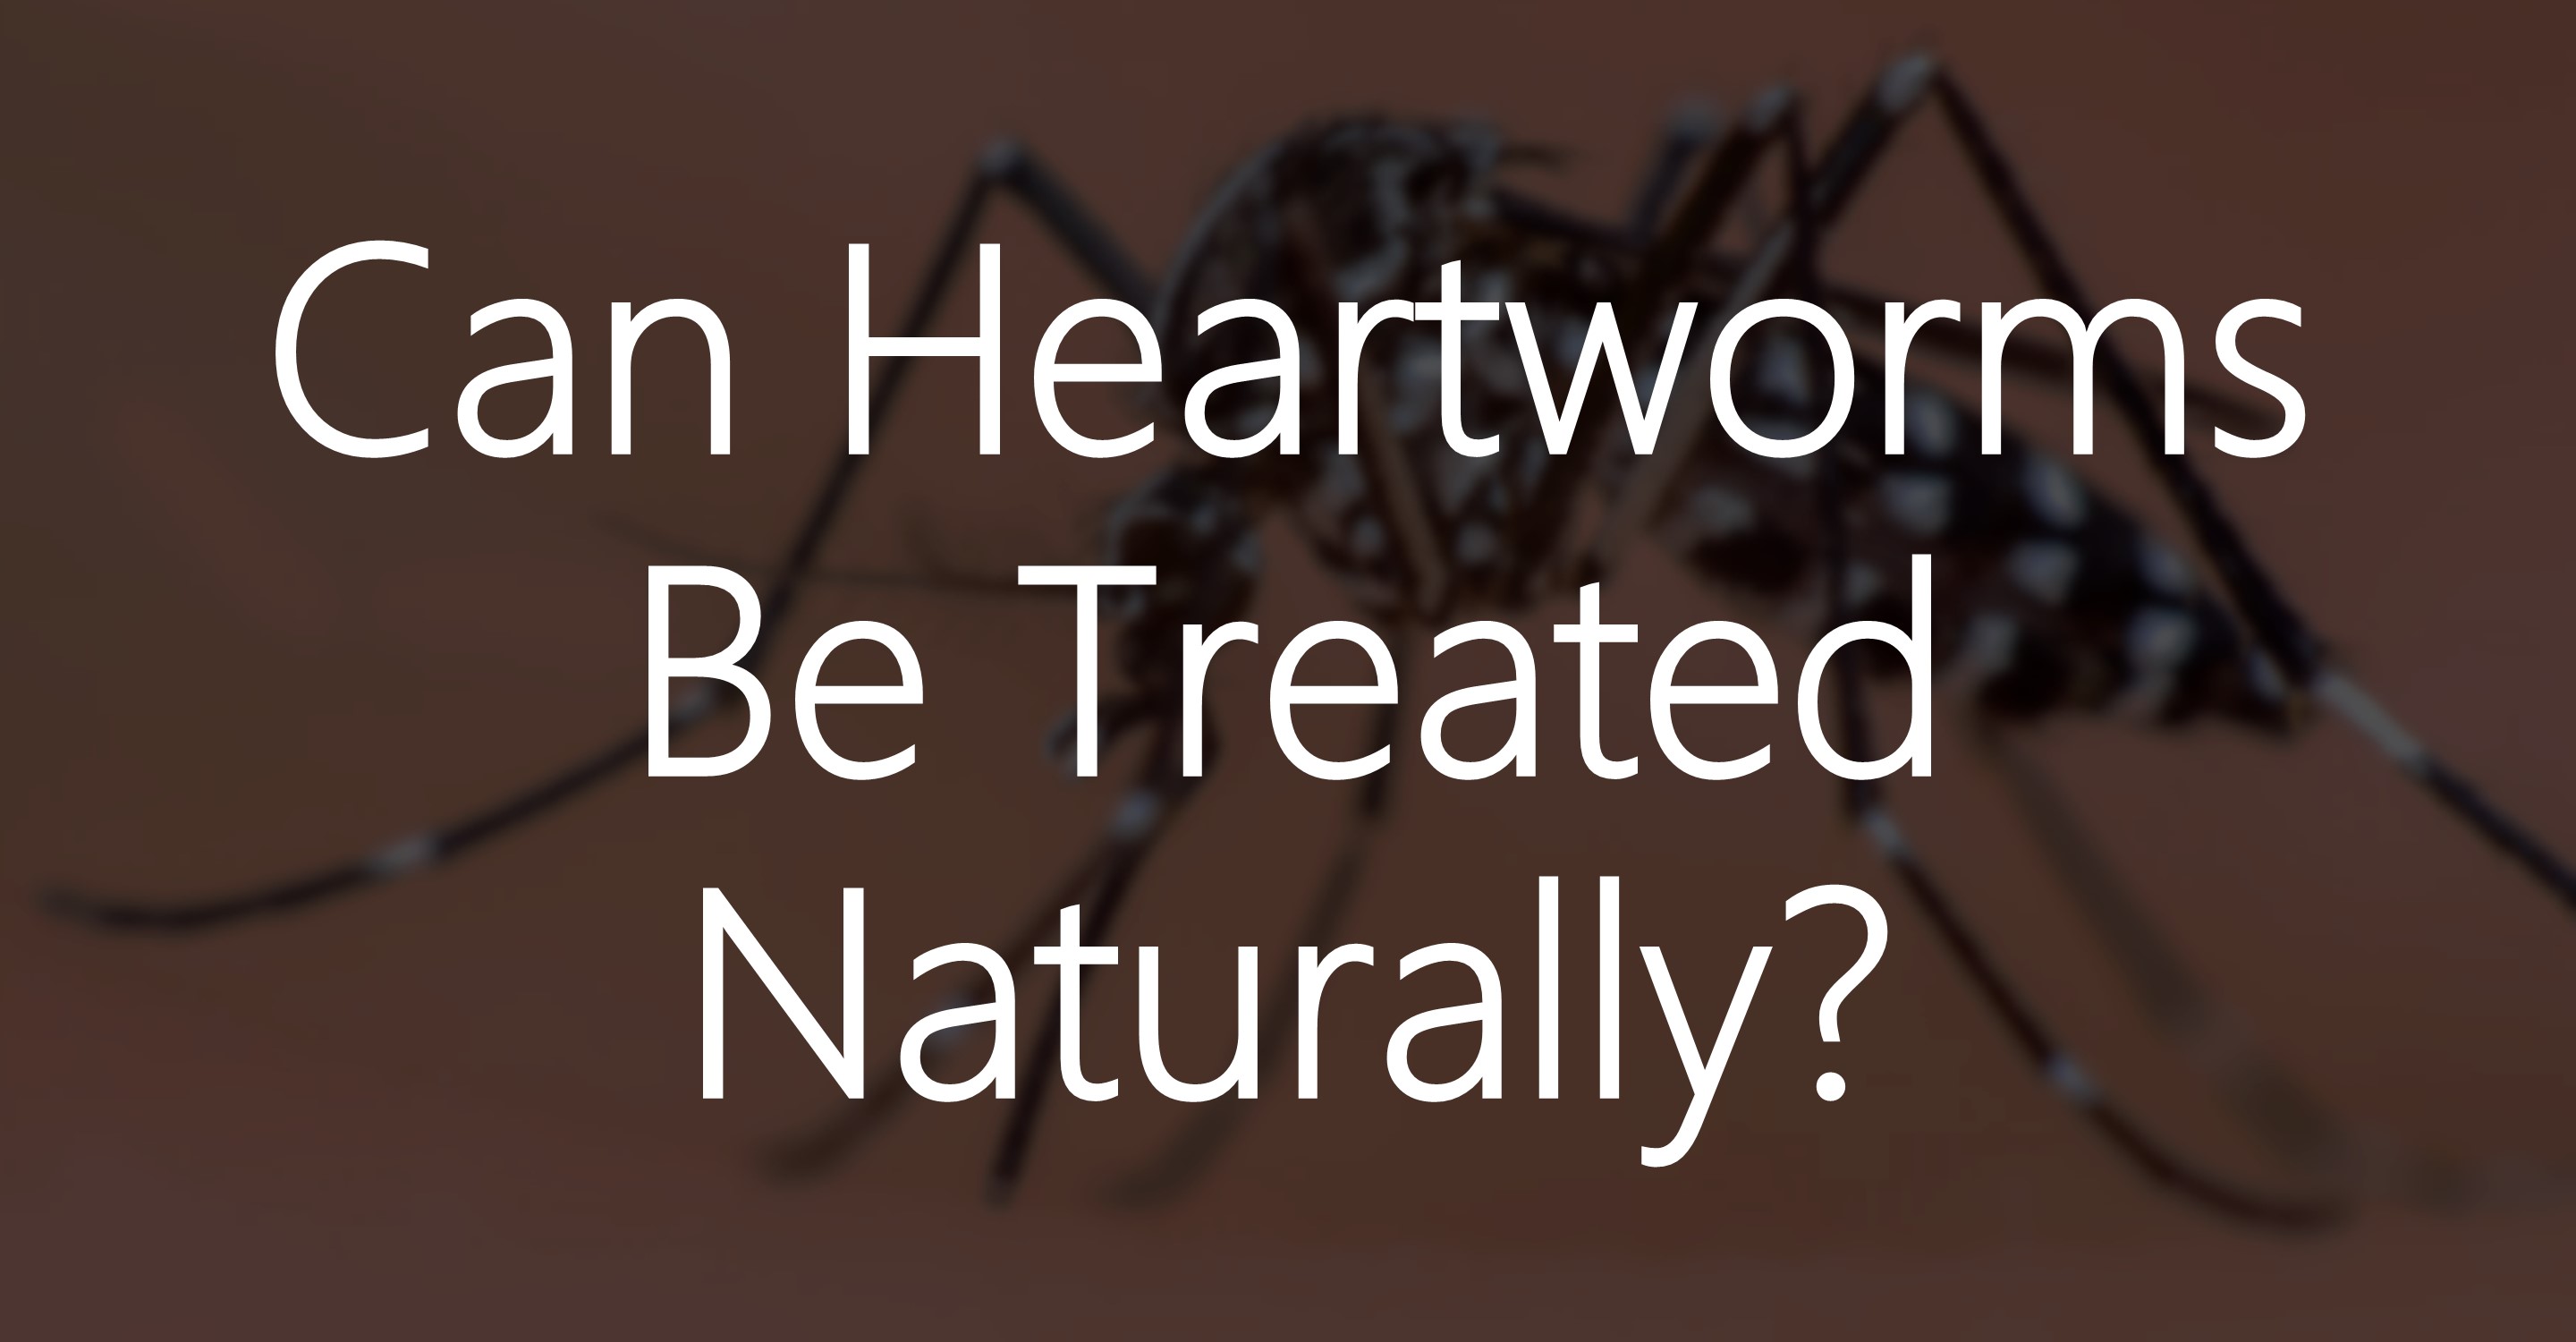 Can Heartworms Be Treated Naturally?